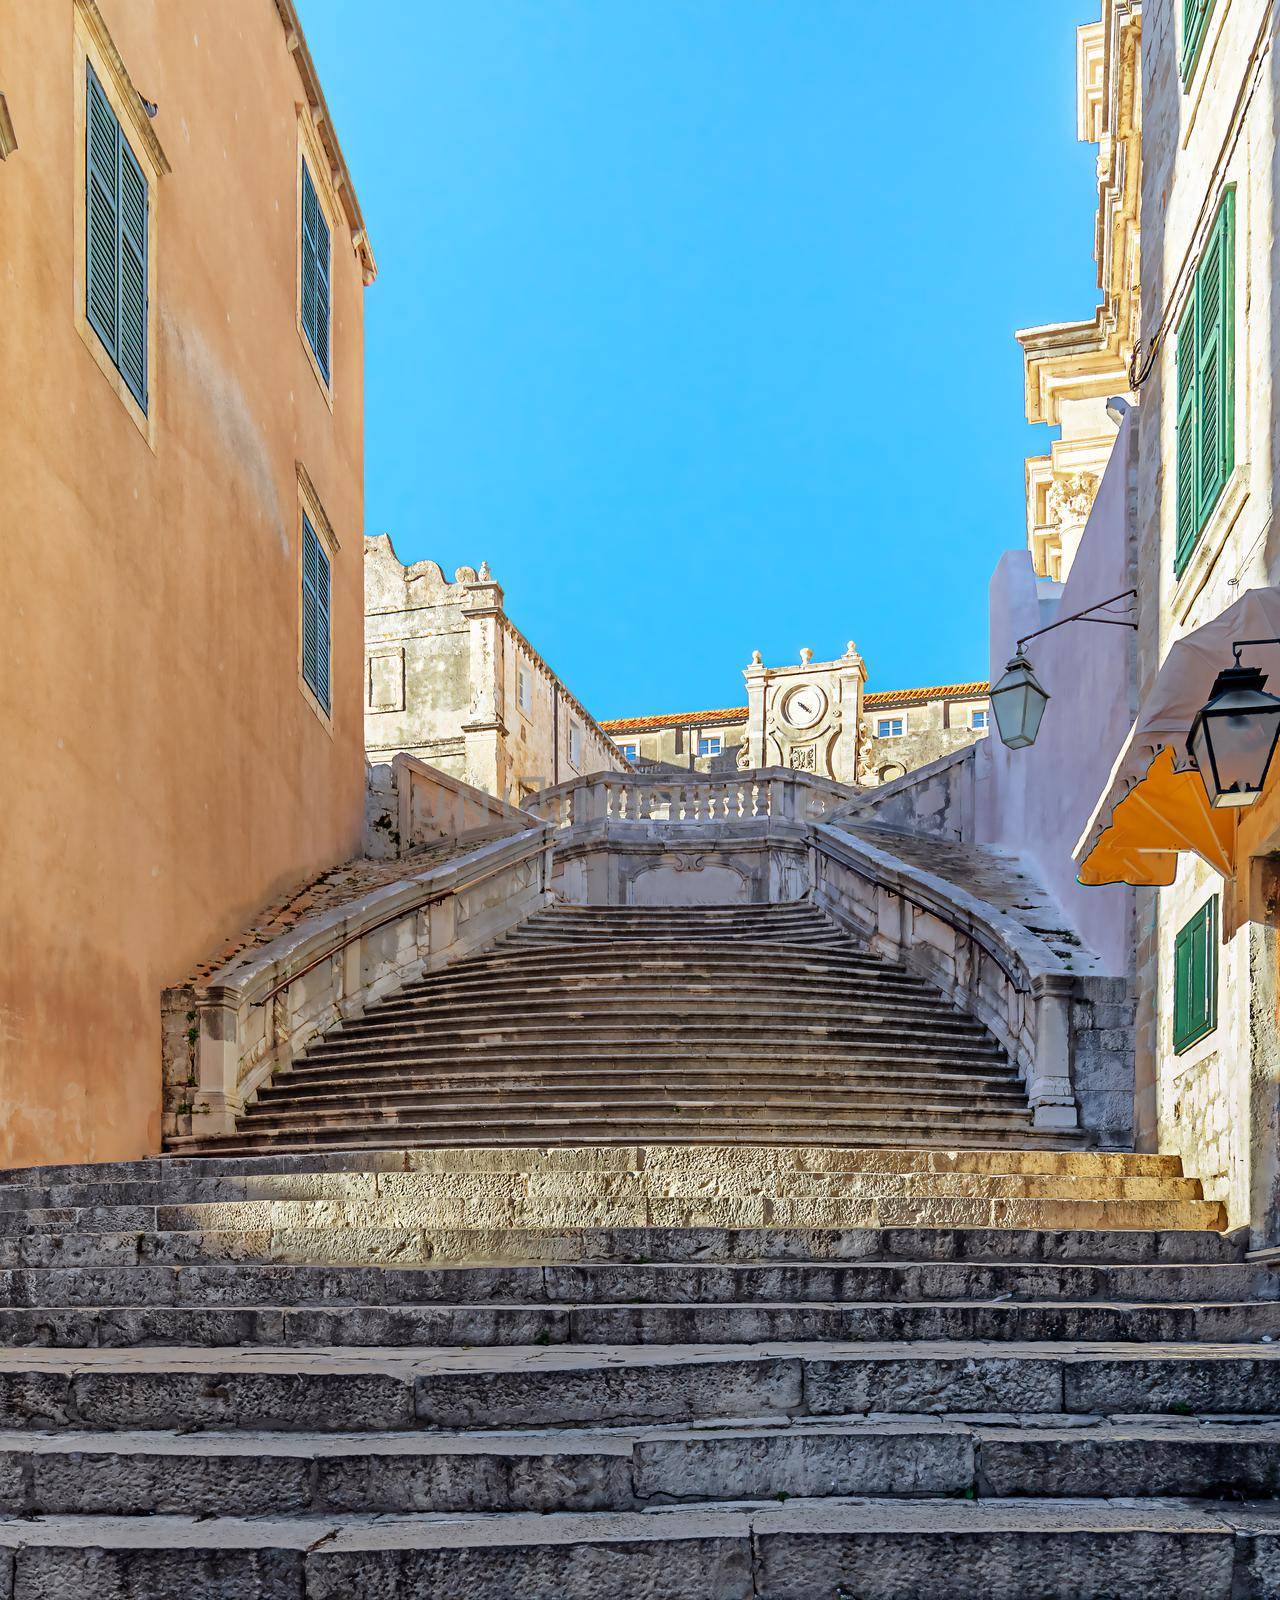 The staircase to the church in the old town of Duborvnik was used in the famous TV series "Game of Thrones" by Cersei Lannister as "avenue of shame"